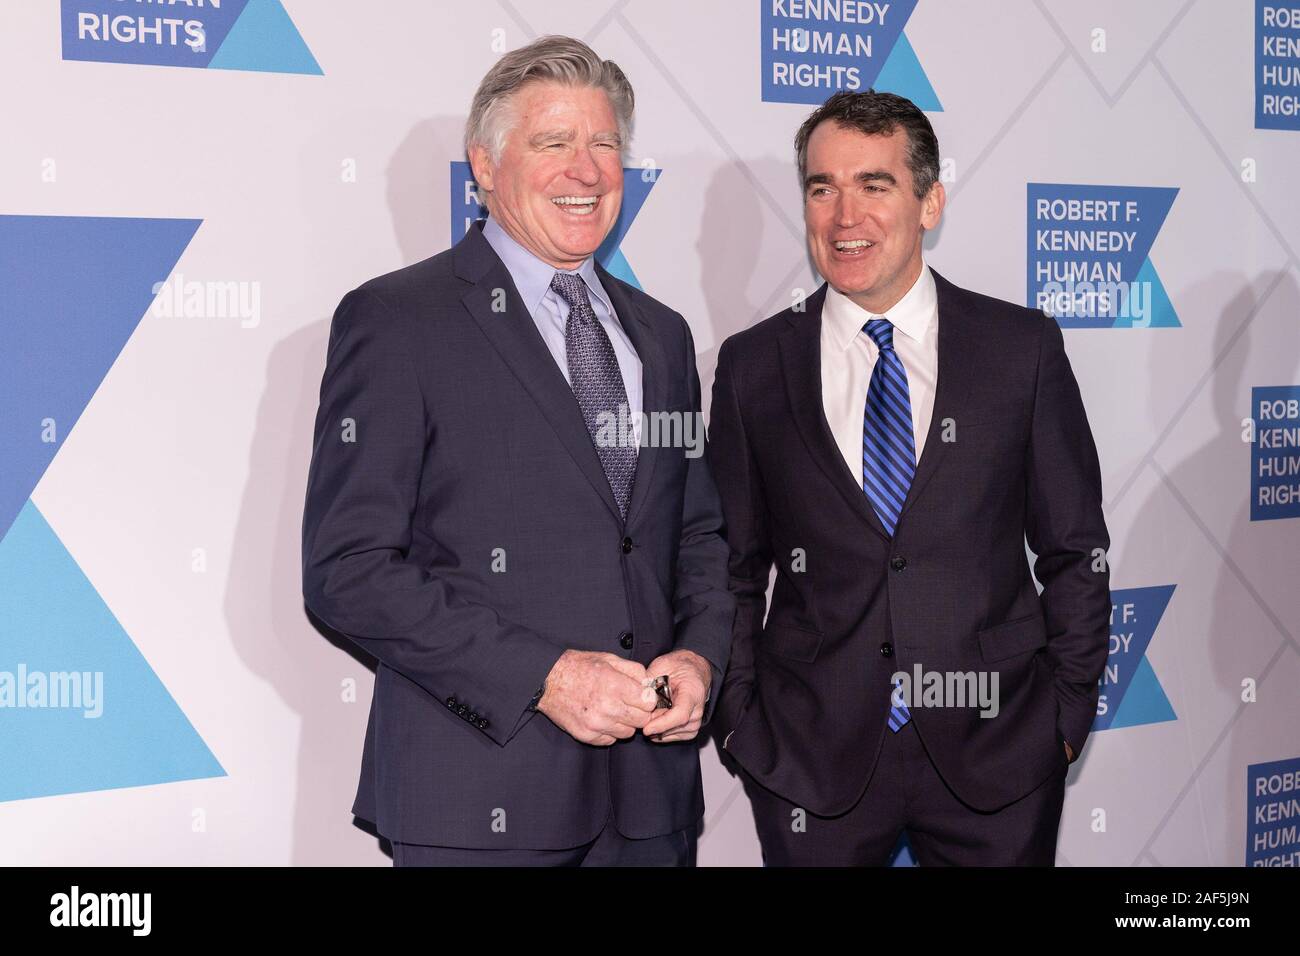 New York, NY, USA. 12th Dec, 2019. Treat Williams, Brian D'Arcy James at arrivals for 51st Annual Robert F. Kennedy Human Rights Ripple of Hope Awards, New York Hilton Midtown, New York, NY December 12, 2019. Credit: Jason Smith/Everett Collection/Alamy Live News Stock Photo